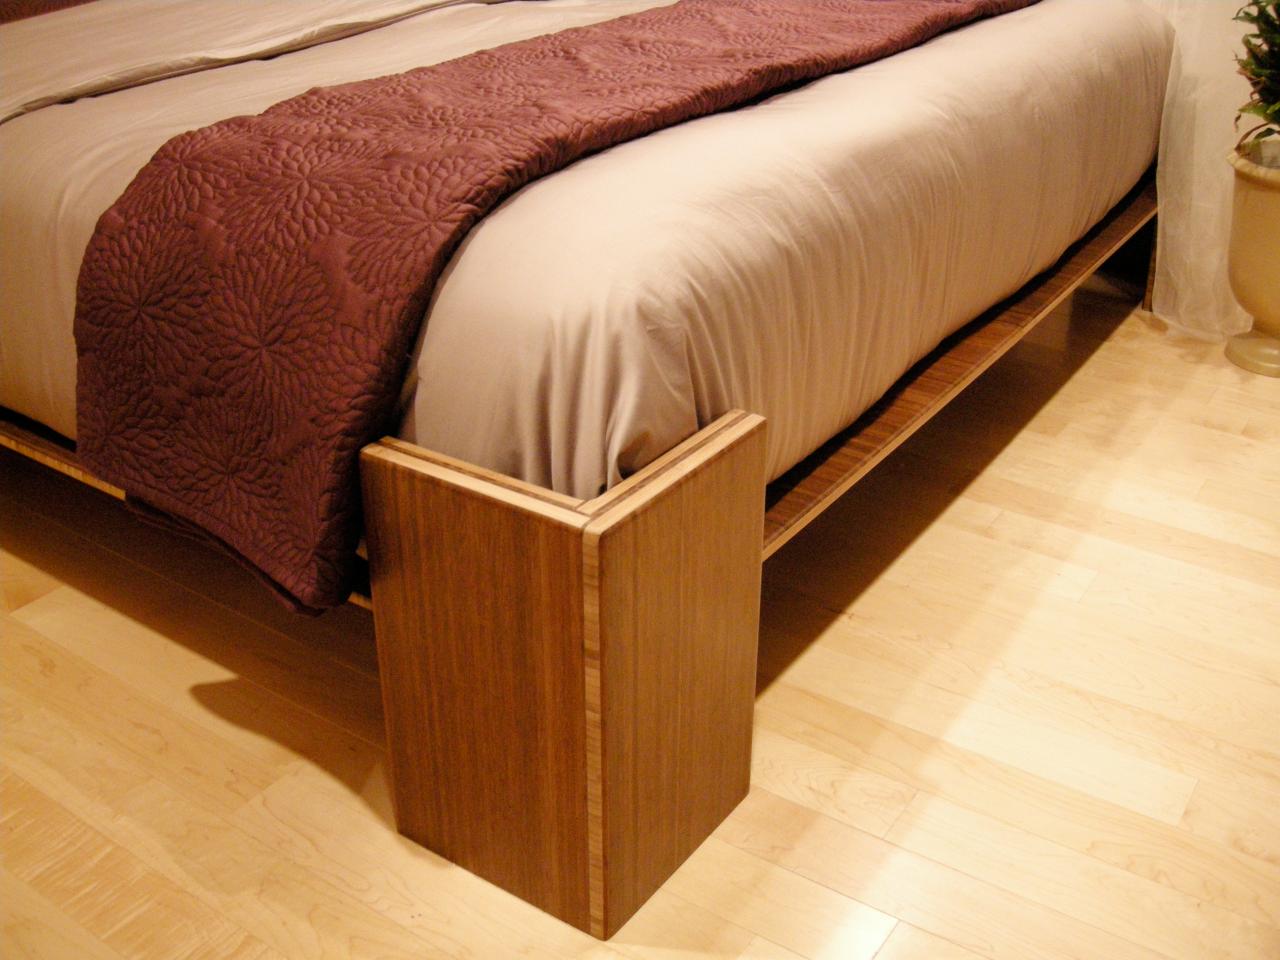 How To Build A Bamboo Platform Bed, Plywood Bed Frame